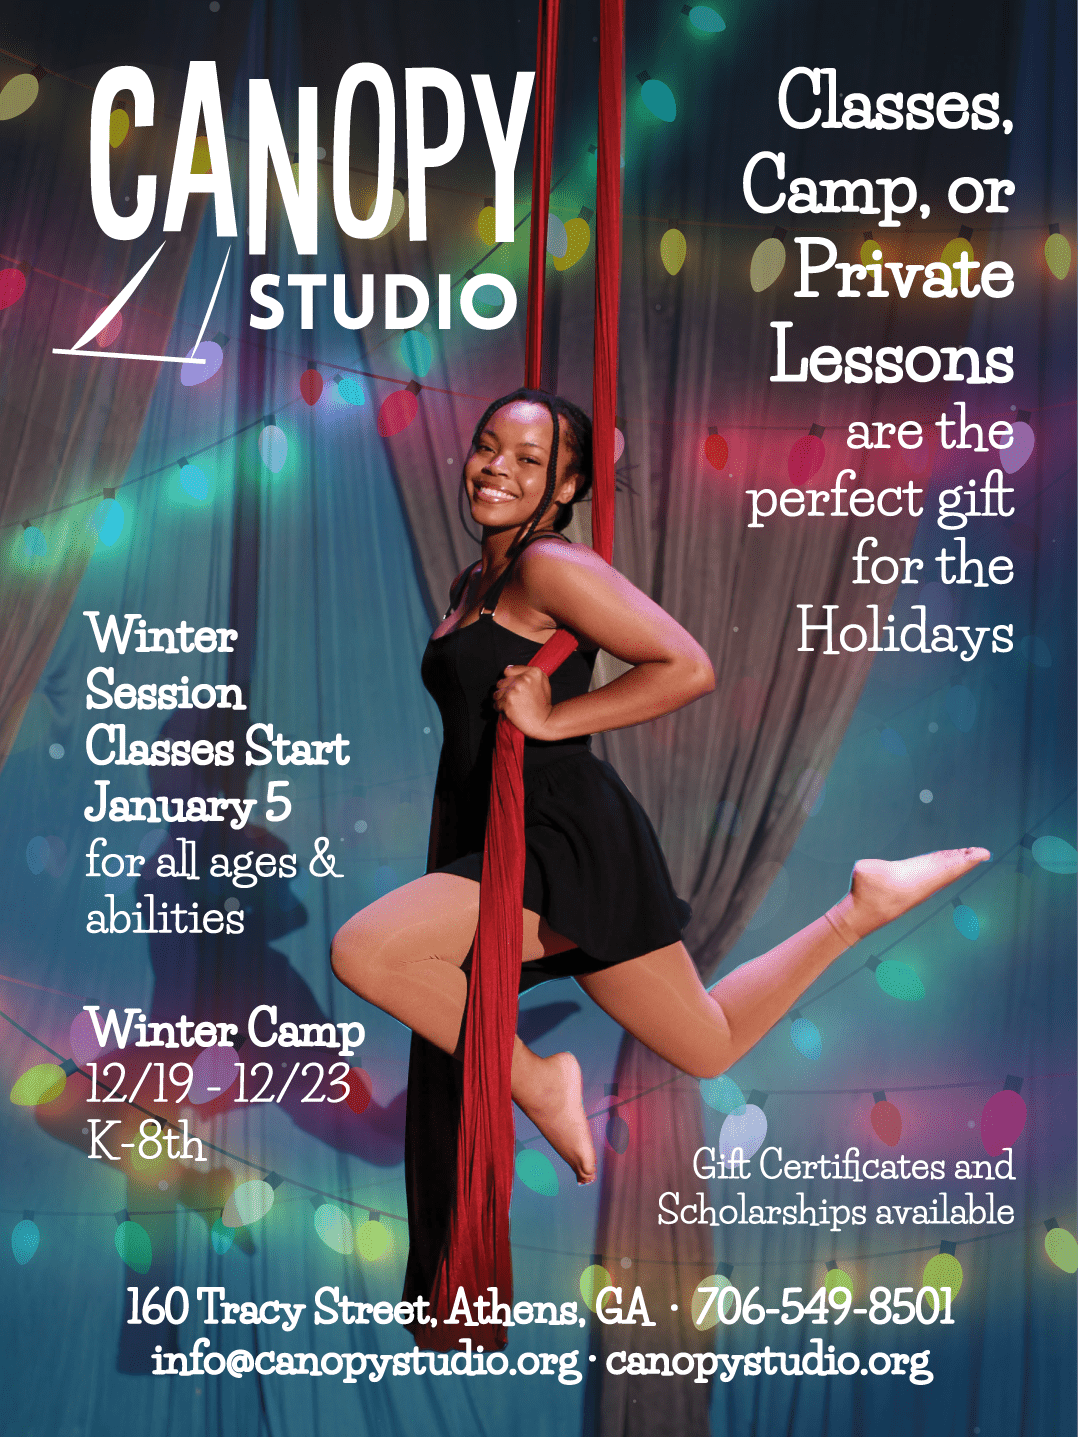 Aerialist is smiling while on a maroon sling. Christmas Twinkle lights border her. Canopy Studio logo on the top left corner. Classes, camp, or private lessons are the perfect gift for the holidays in the top right corner.